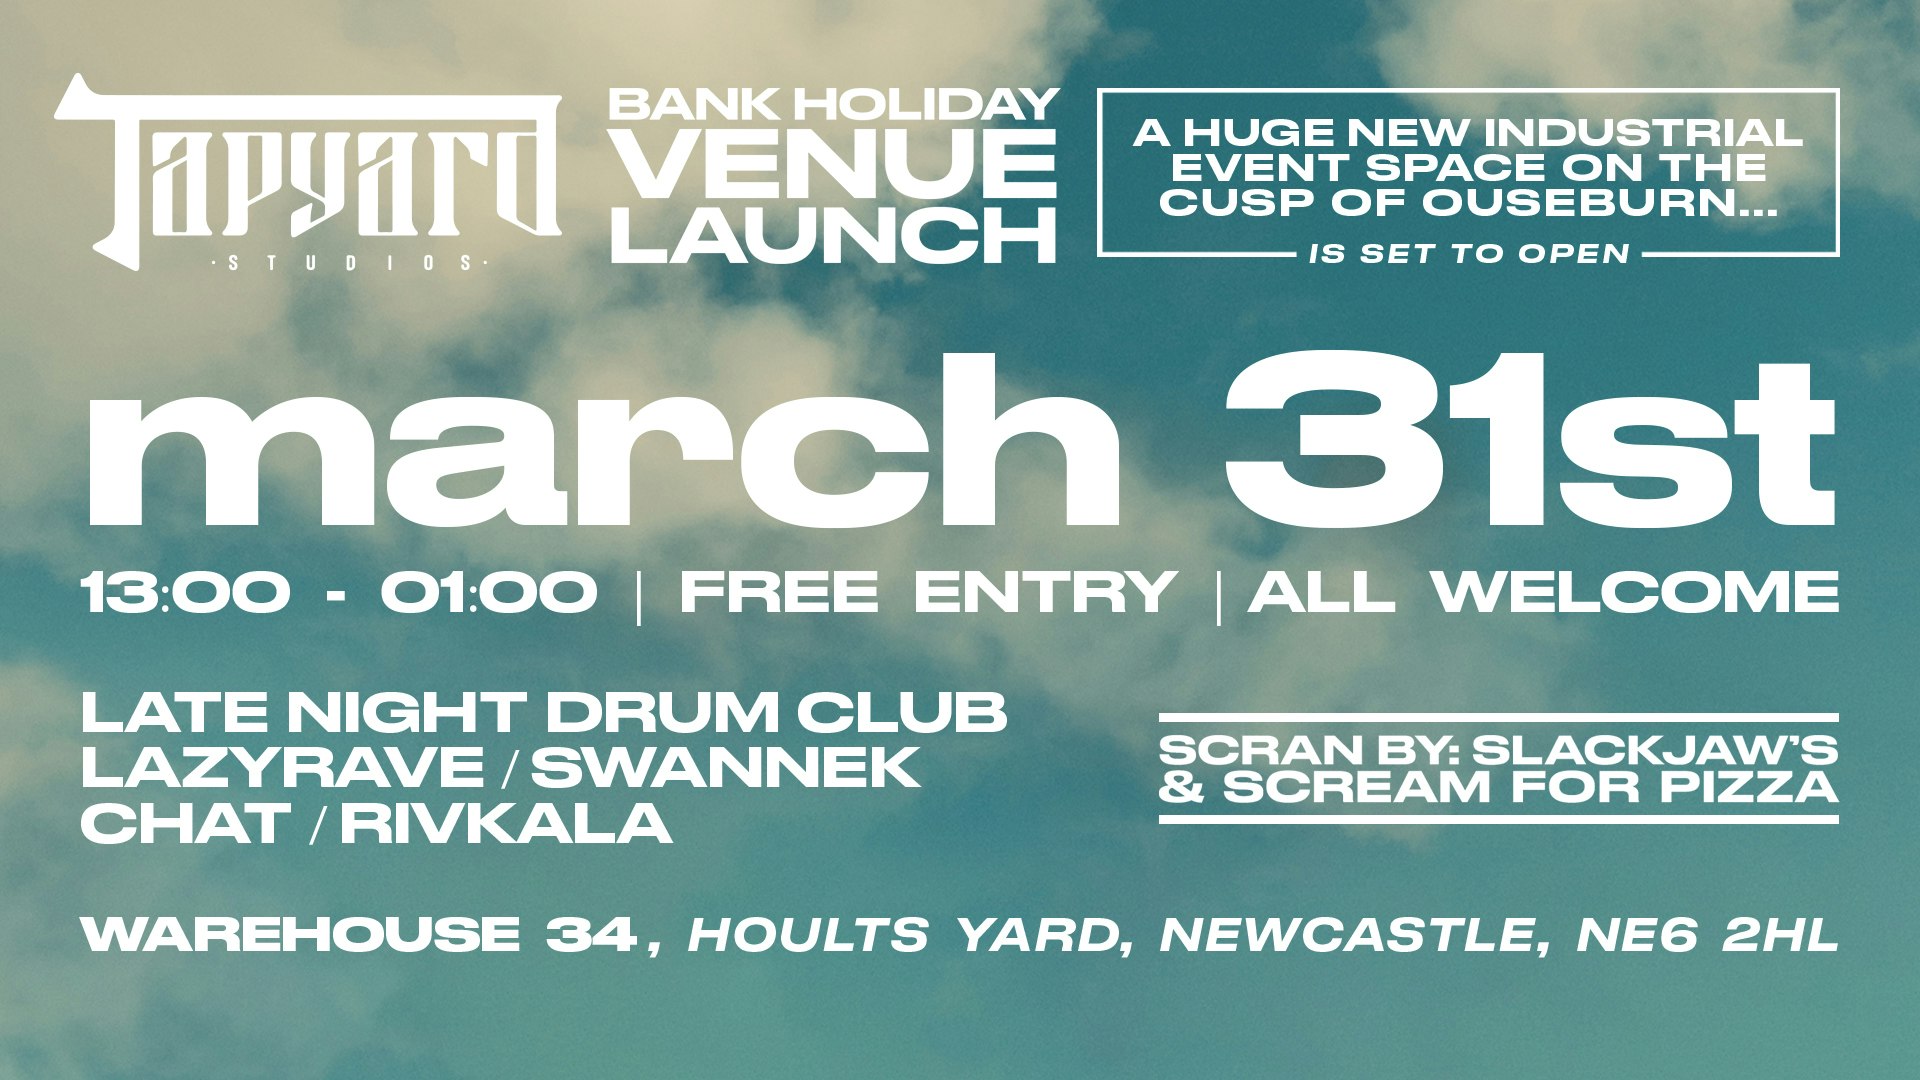 Tapyard Studios Launch ft. Late Night Drum Club + Many More